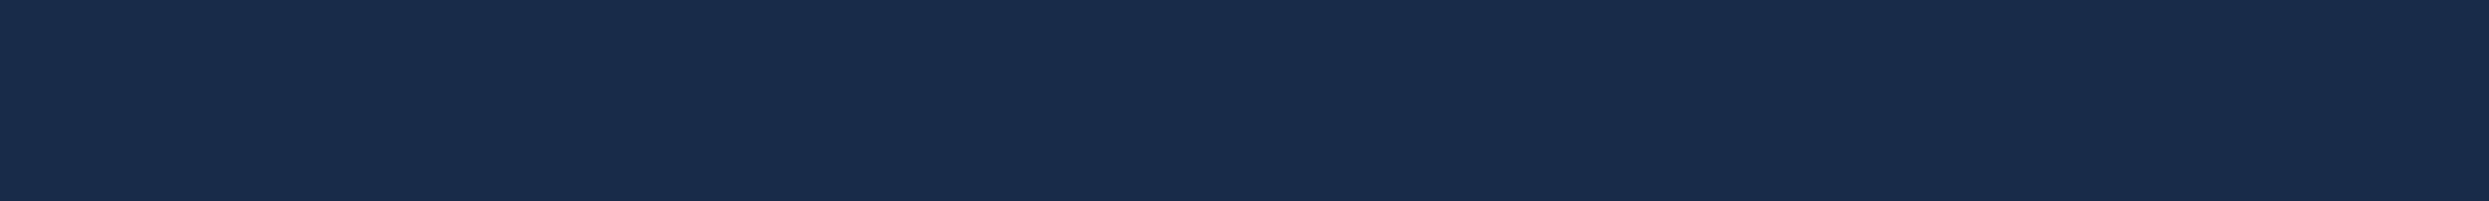 Navy blue background with "videos and podcasts" text